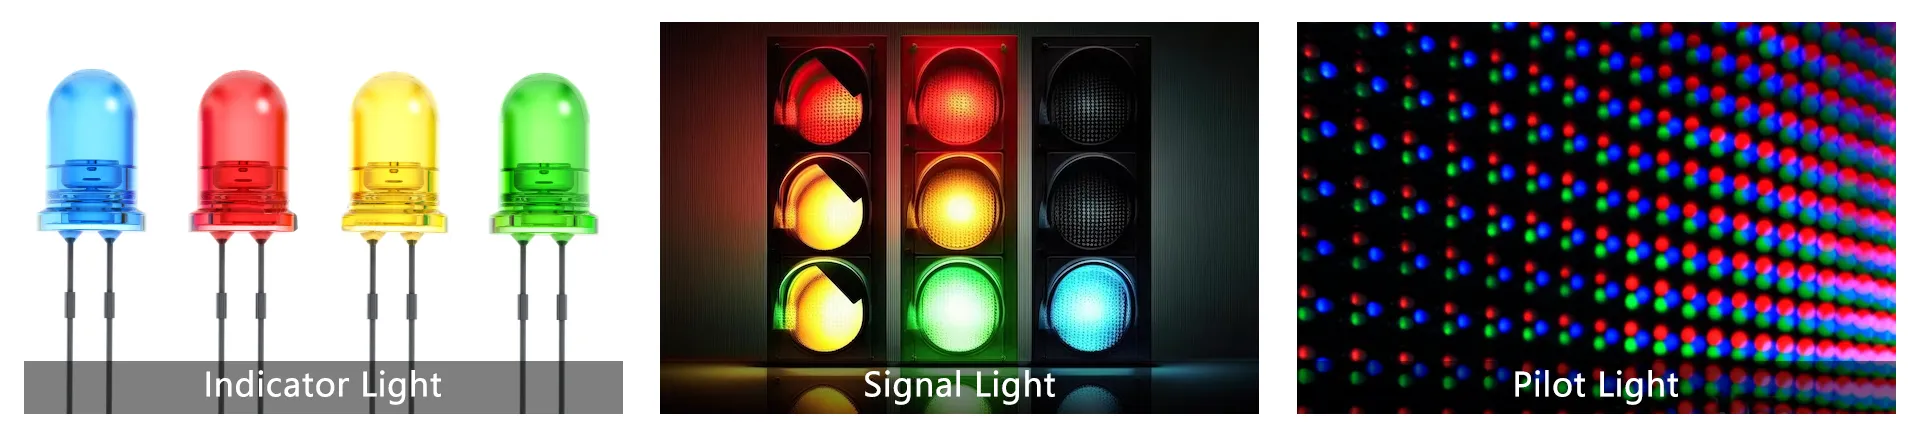 indicator light Color and Shape